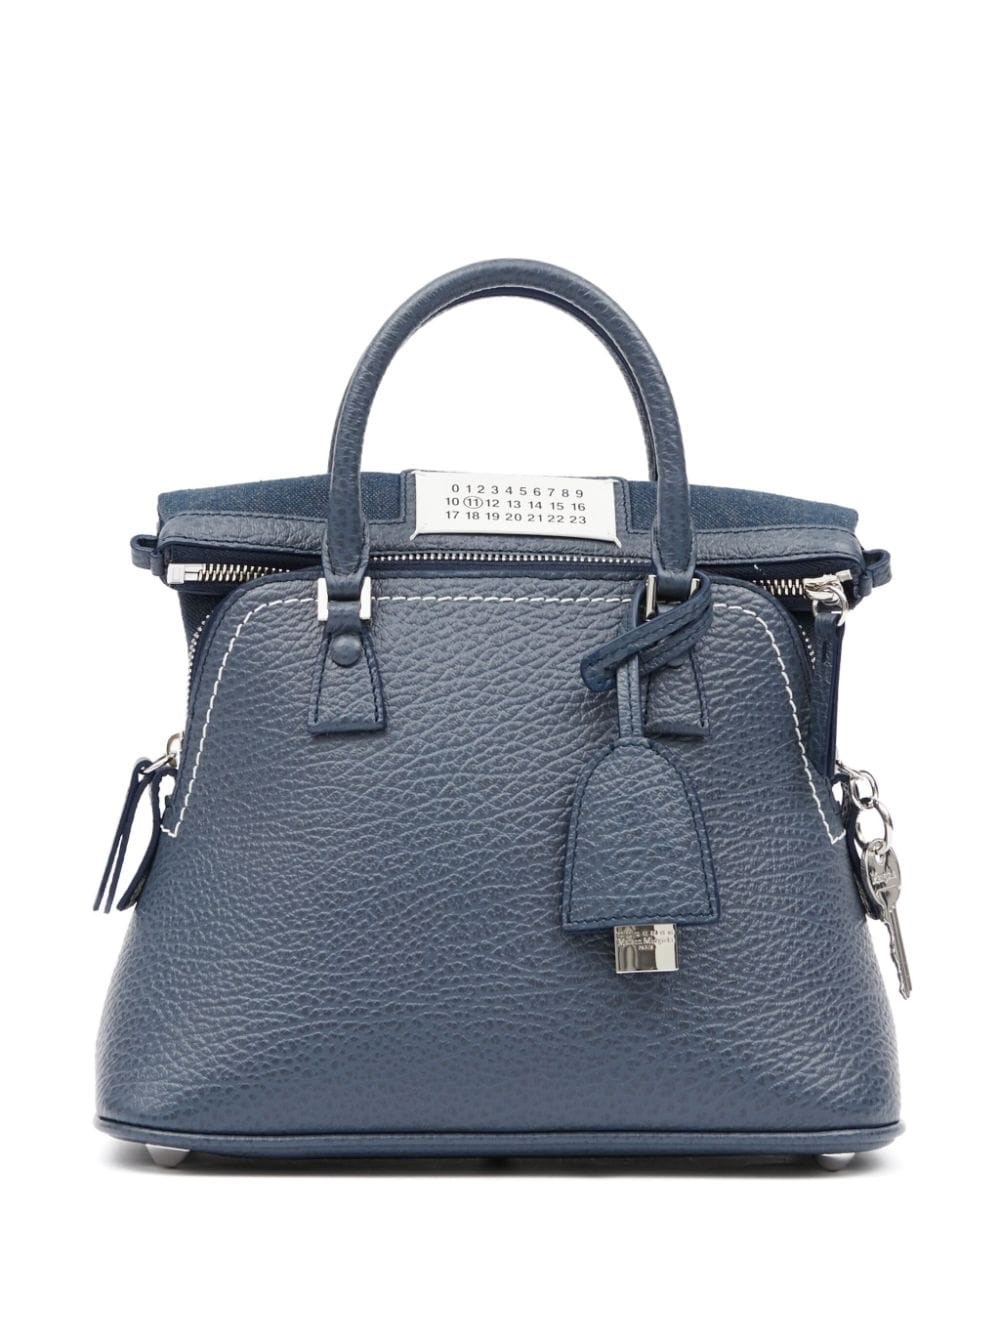 Maison Margiela 5ac Mini Grained Leather Top Handle Bag In Gray